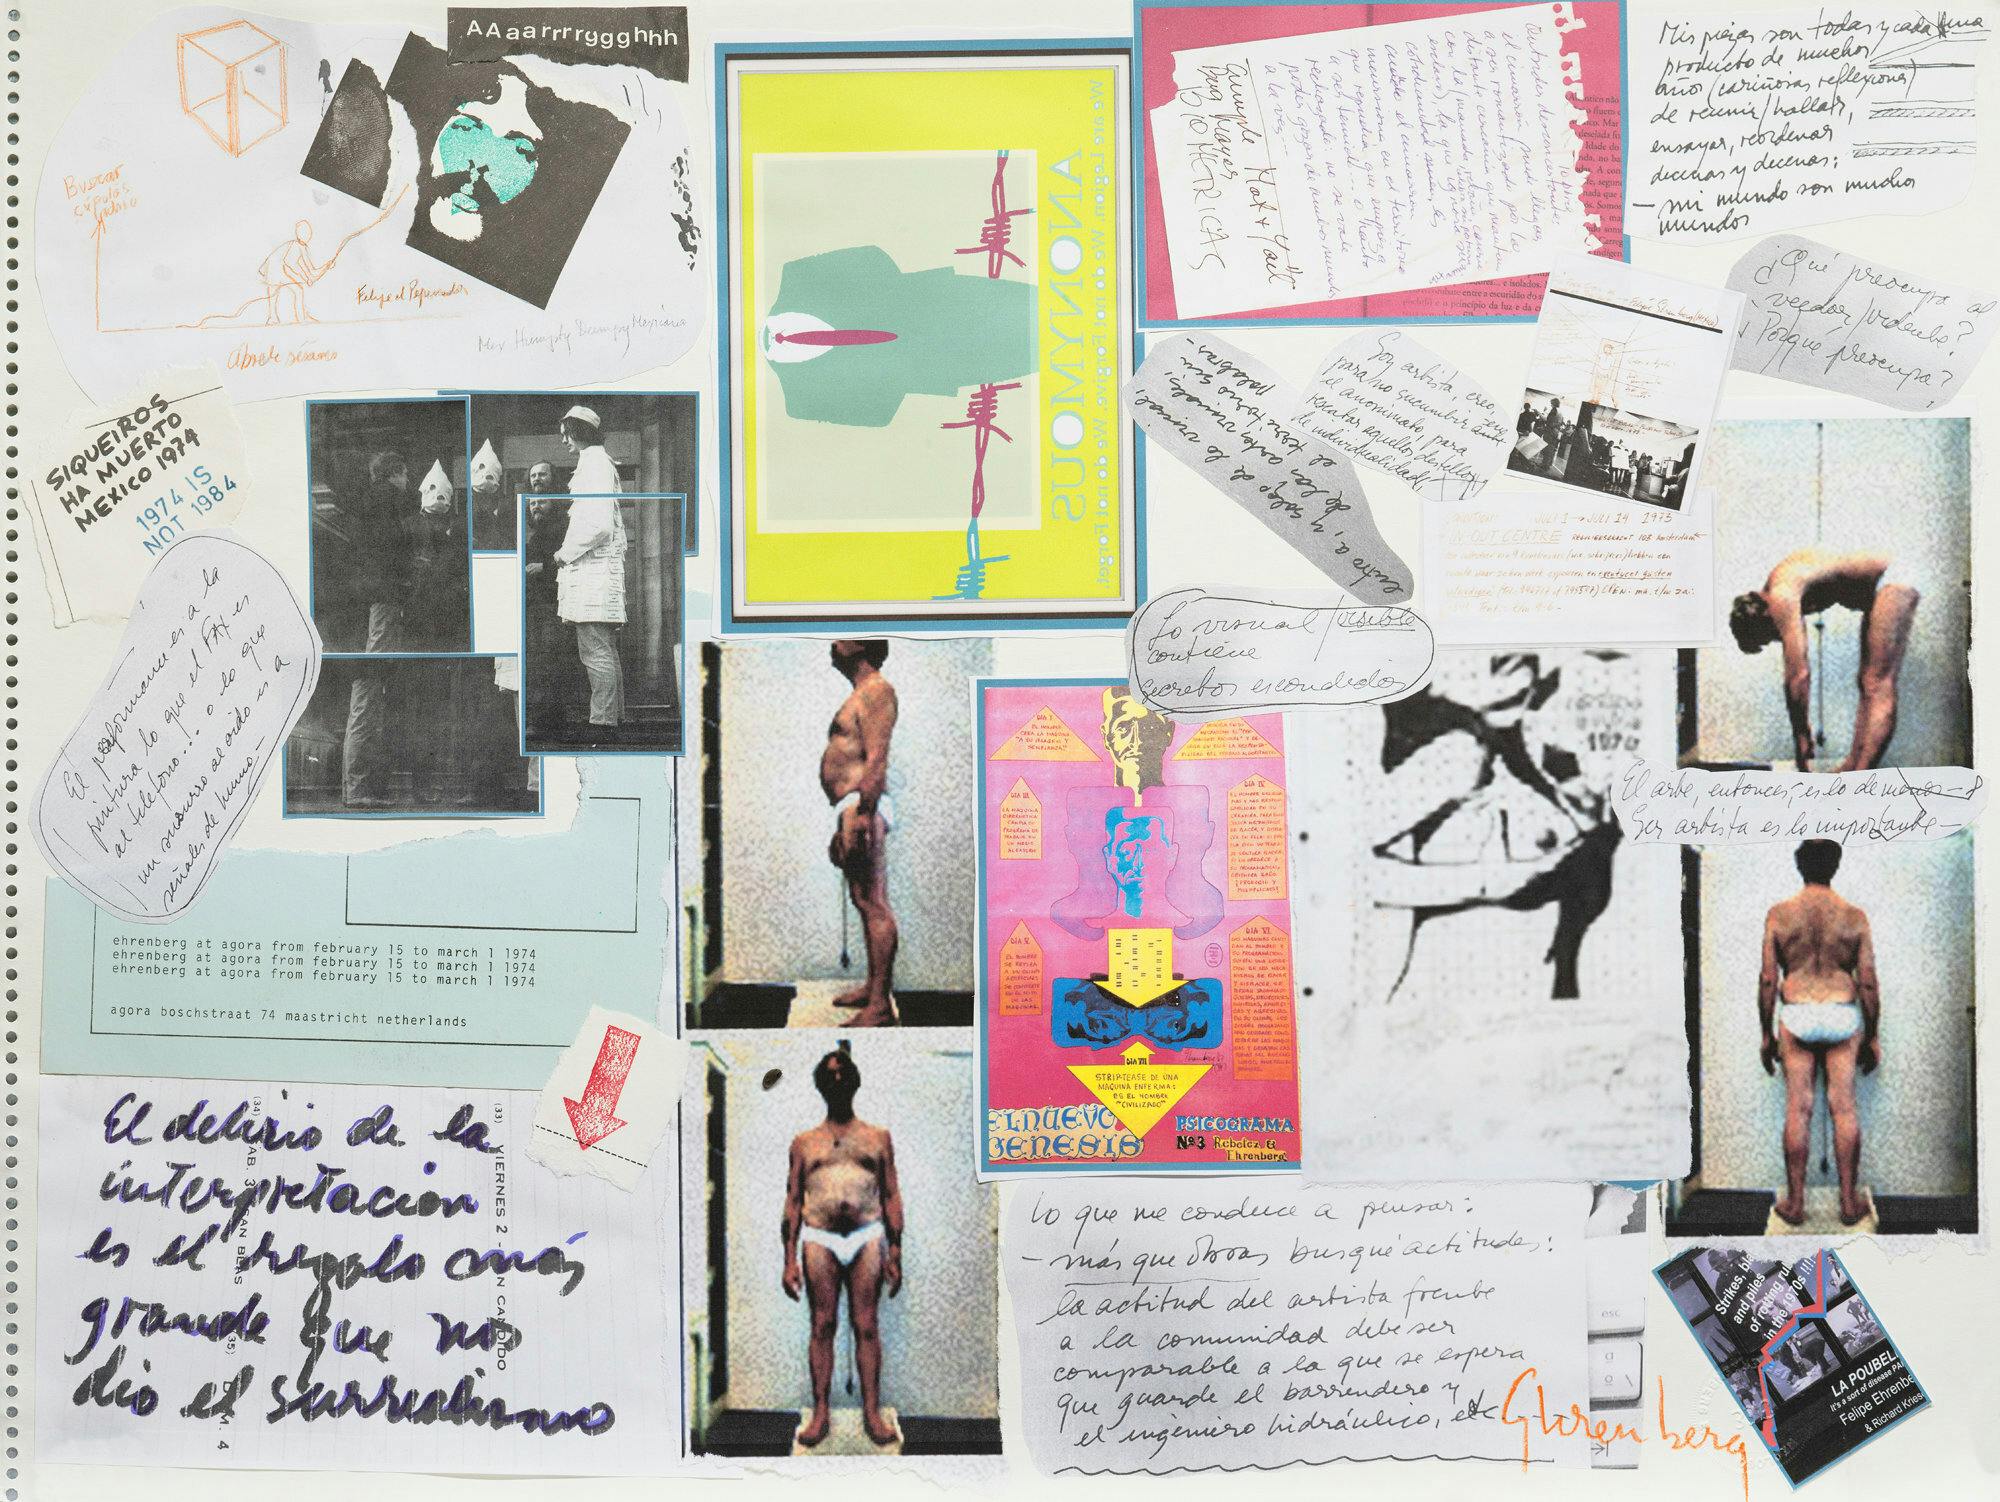 A collage showing fragments of handwritten notes and portraits of Felipe Ehrenberg.